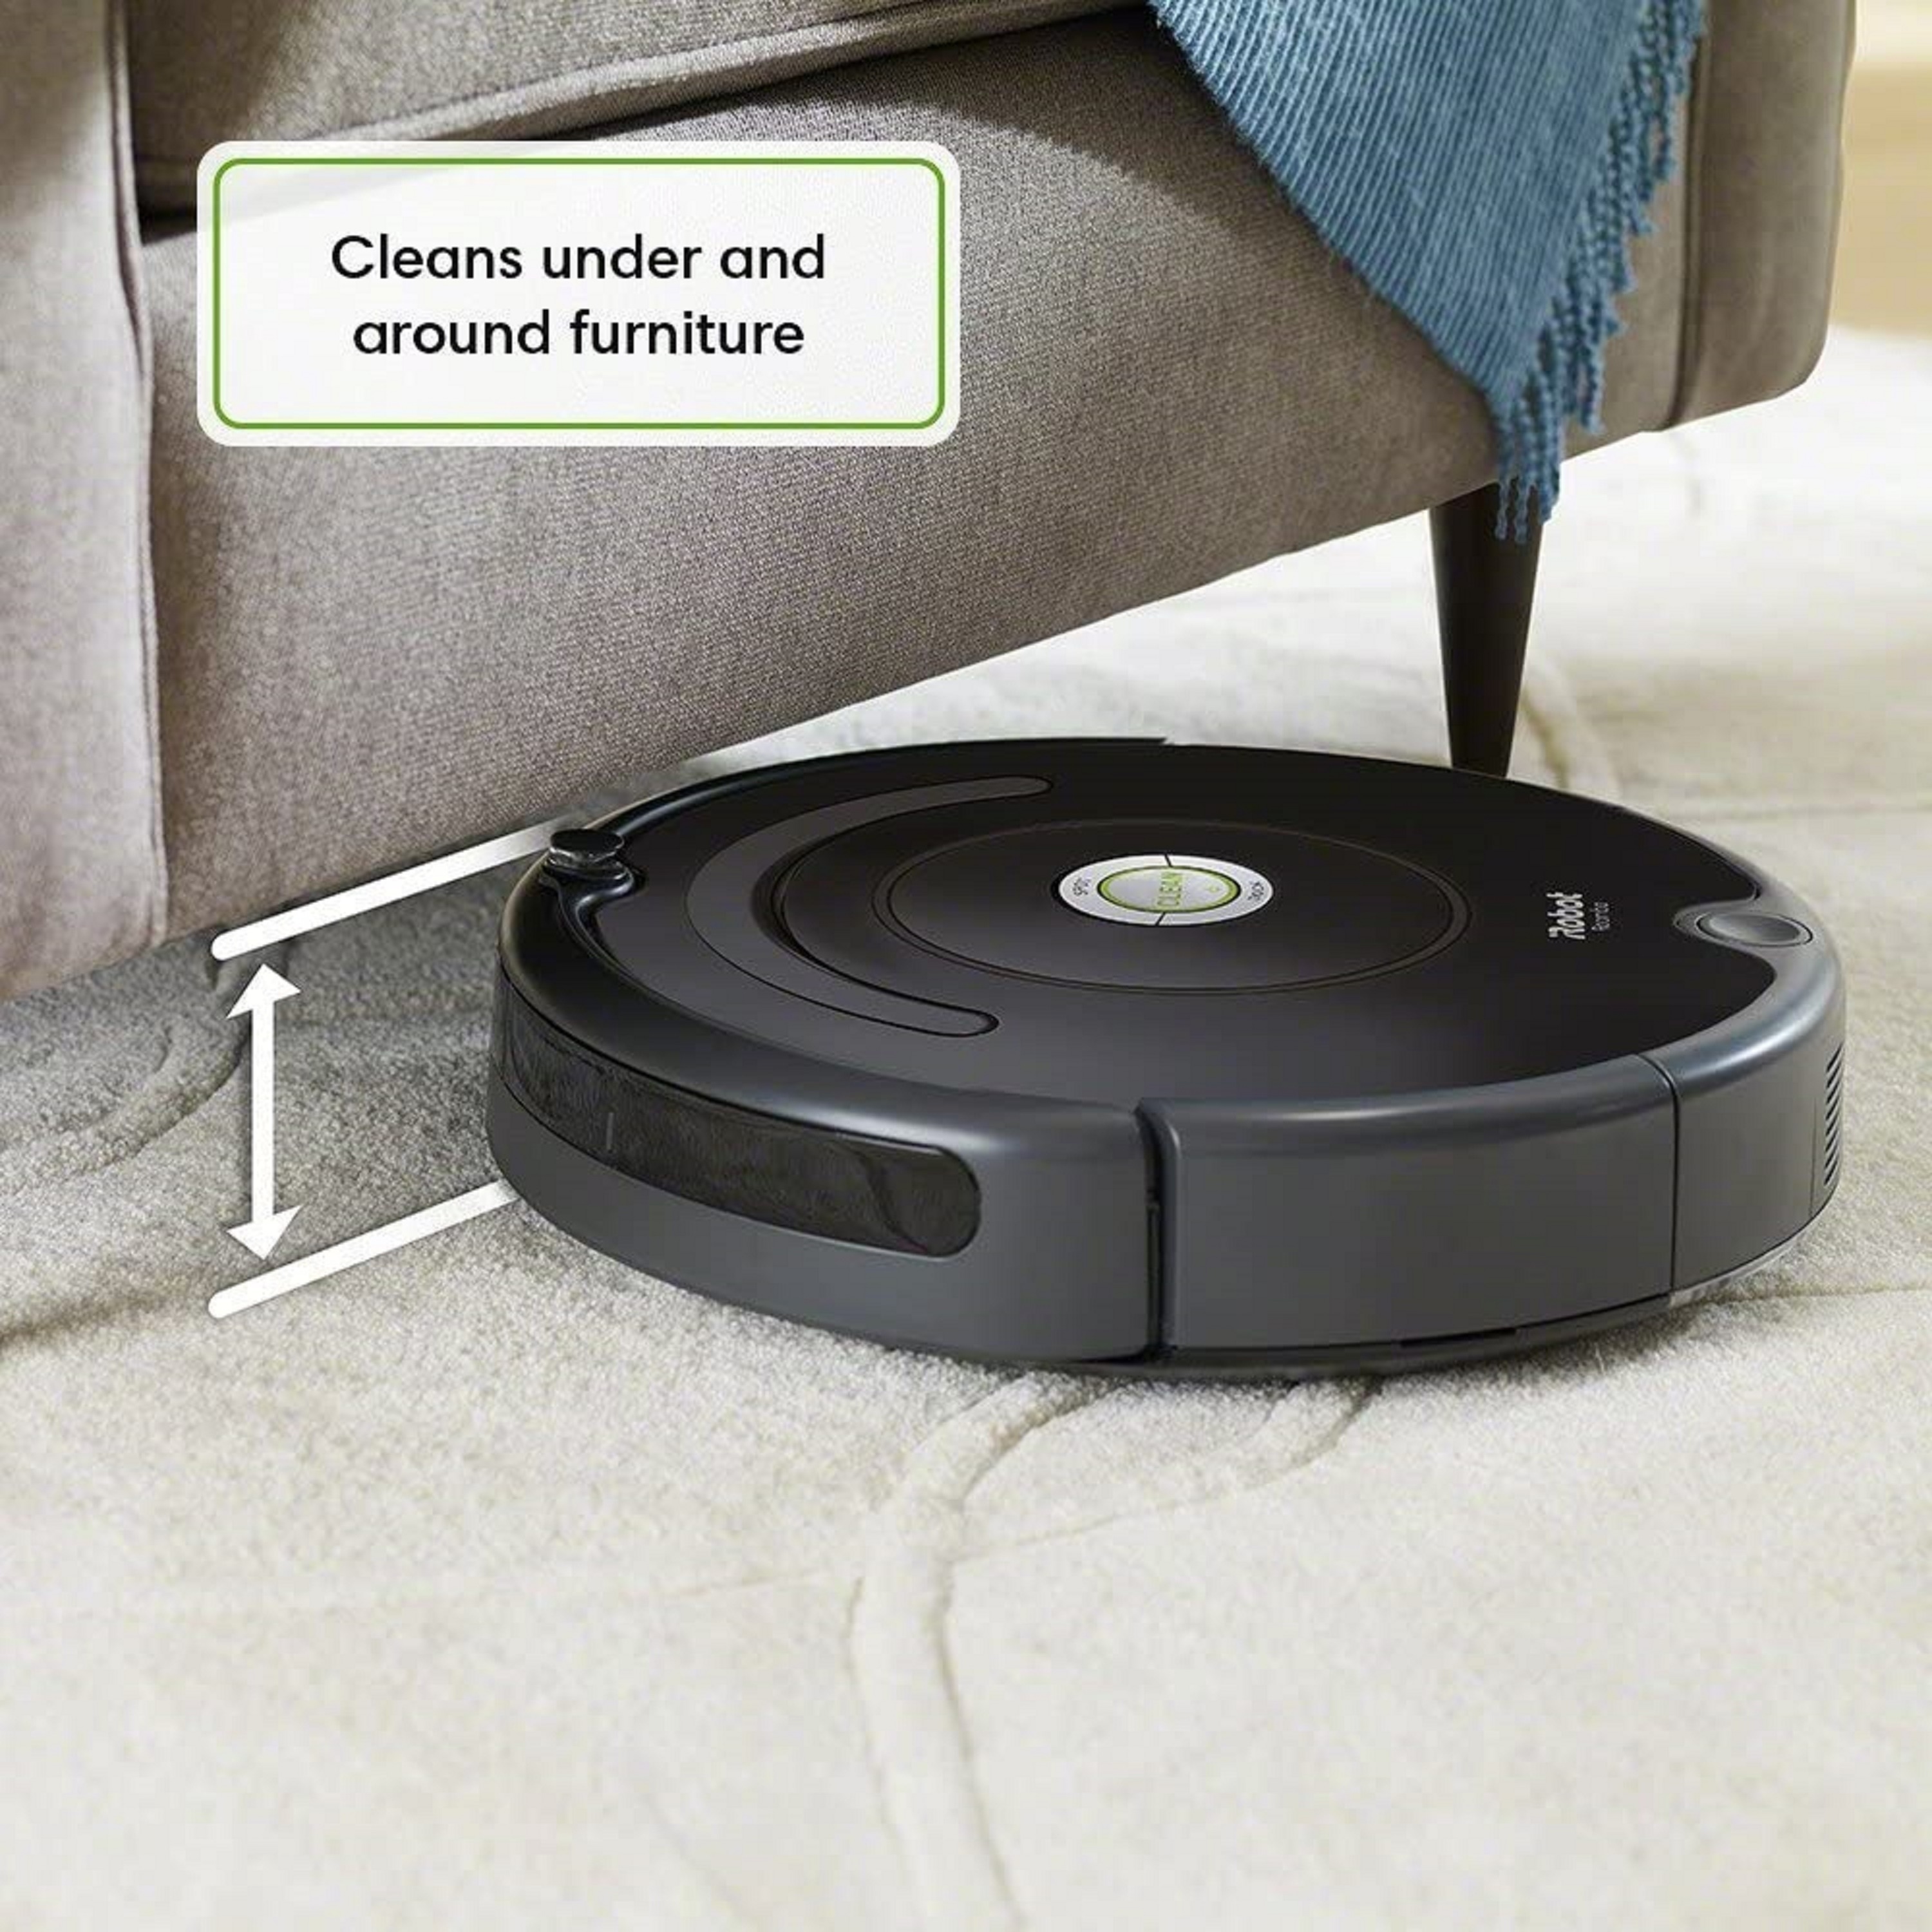  iRobot Roomba E5 (5150) Robot Vacuum - Wi-Fi Connected,  Compatible with Alexa, Ideal for Pet Hair, Carpets, Hard, Self-Charging  Robotic Vacuum, Black (Renewed)